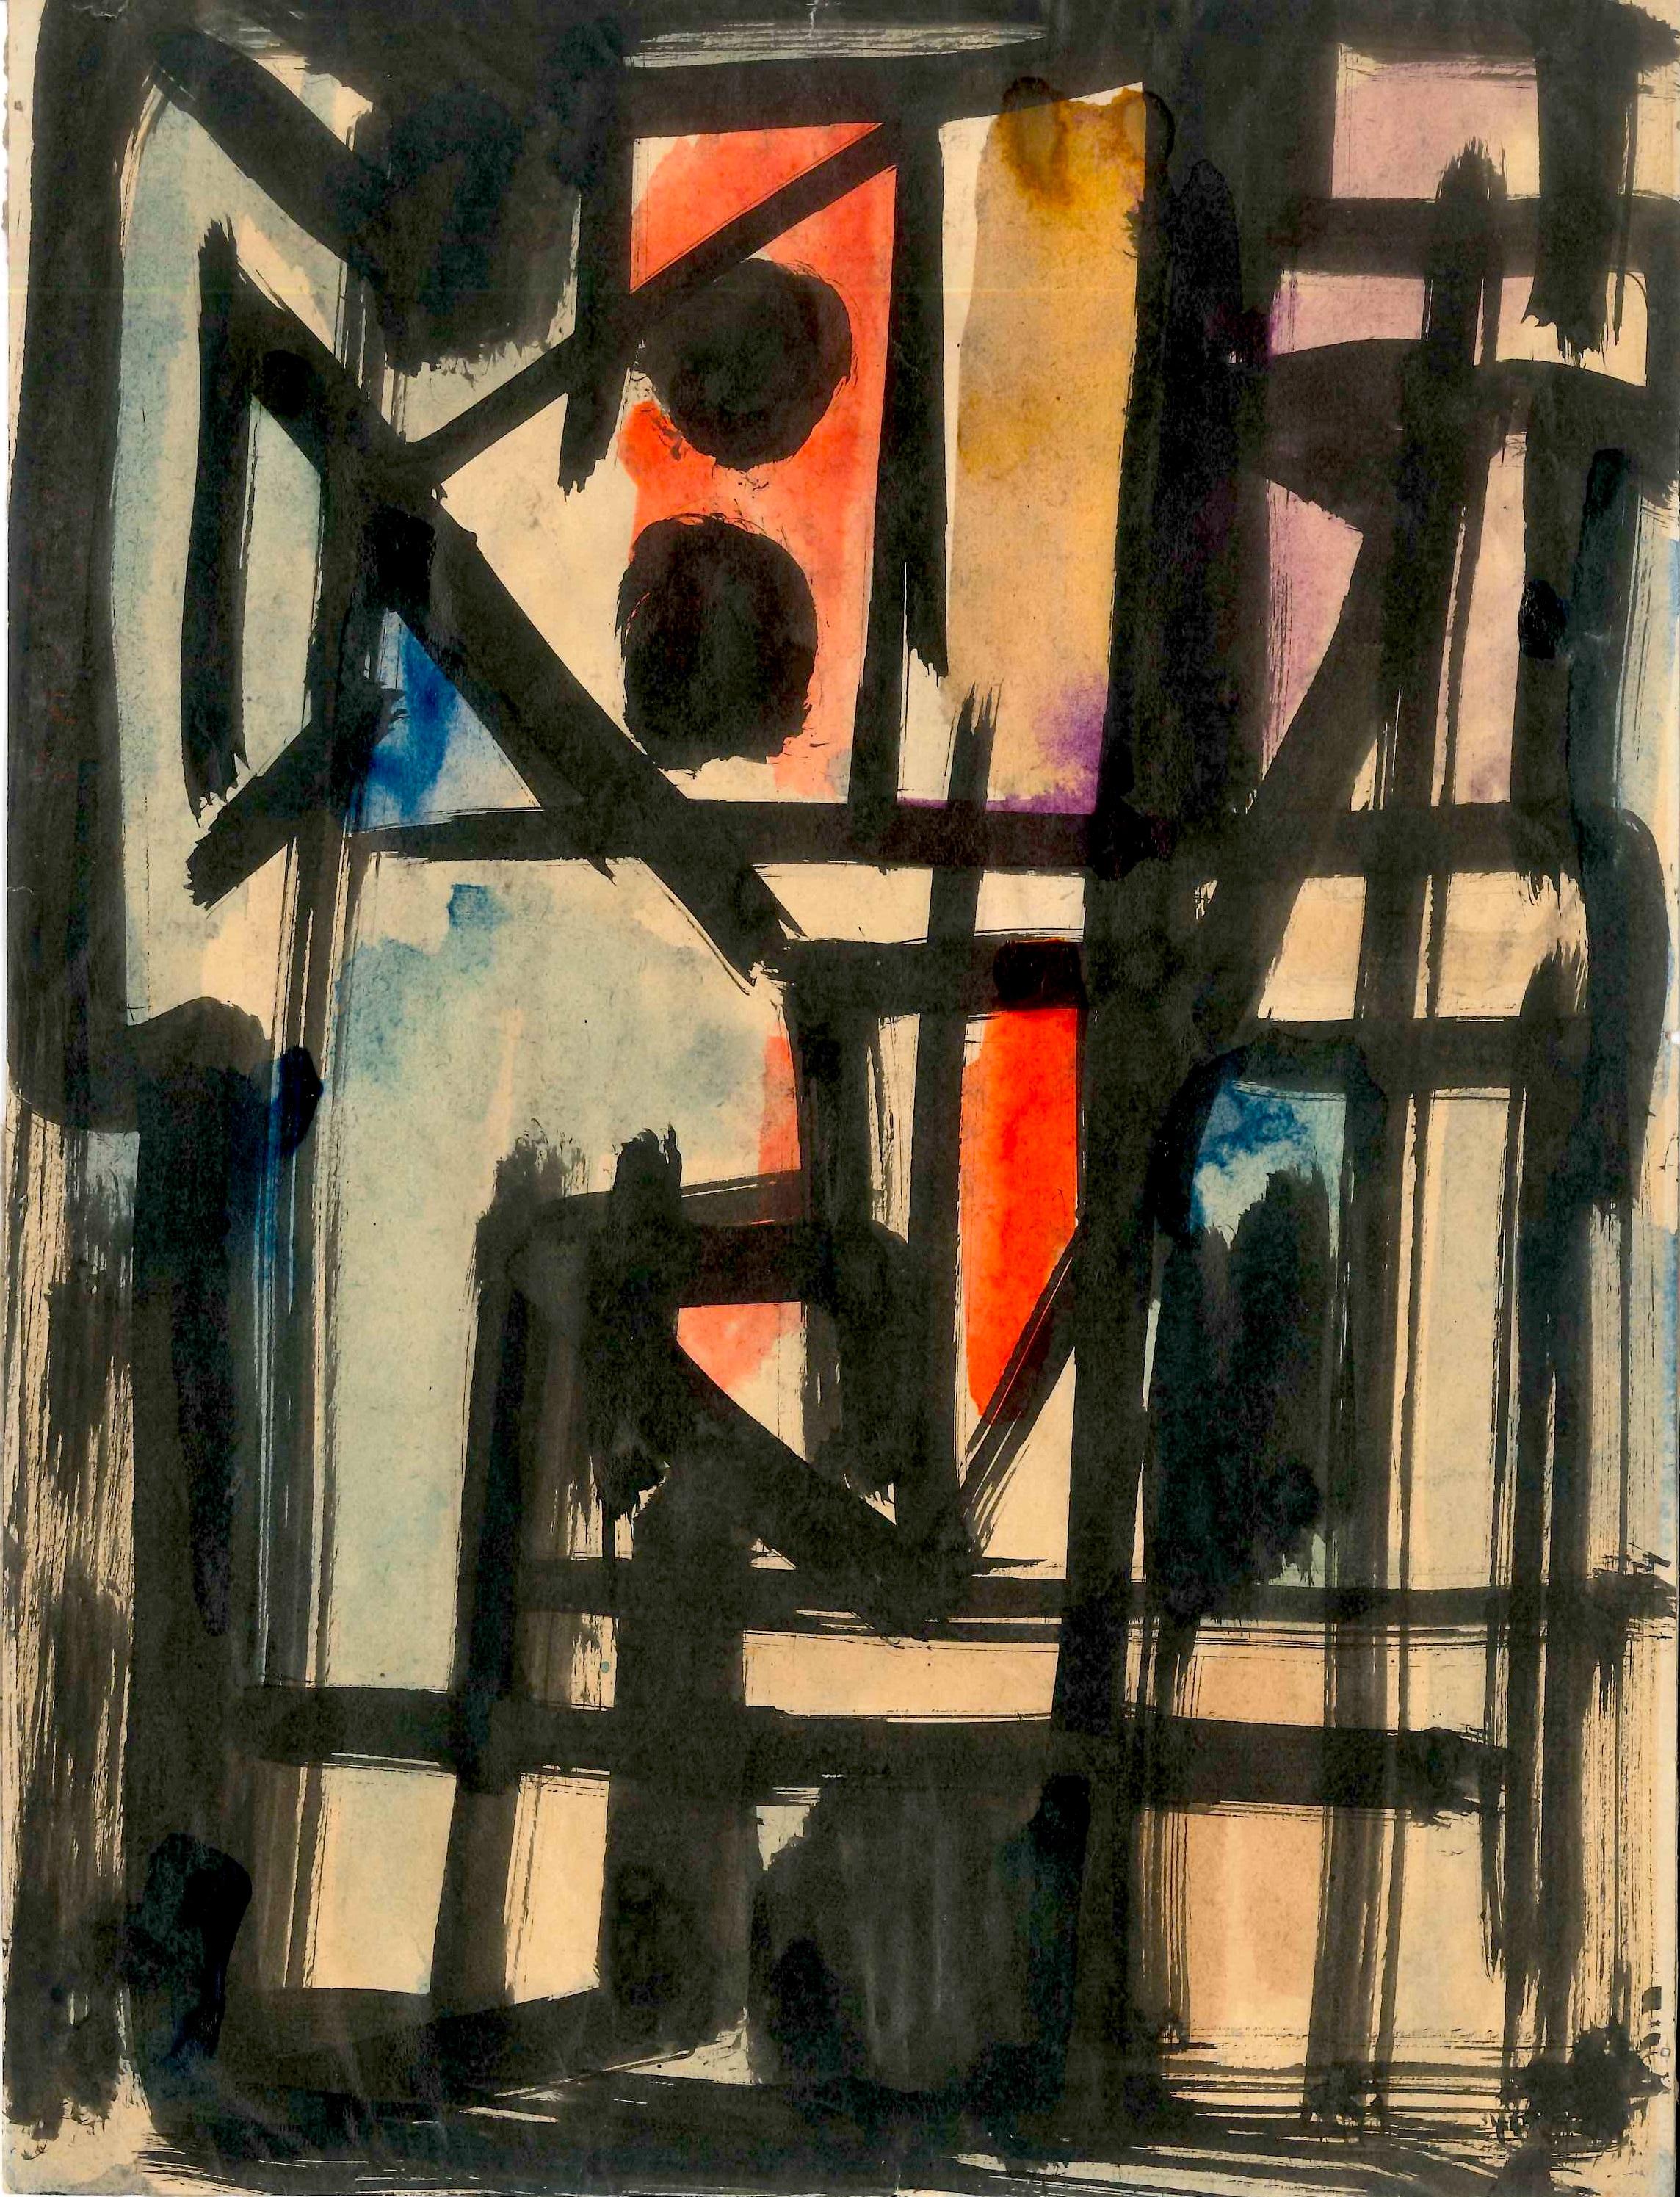 Abstract Composition - Original Ink on Paper by Emilio Vedova - 1950